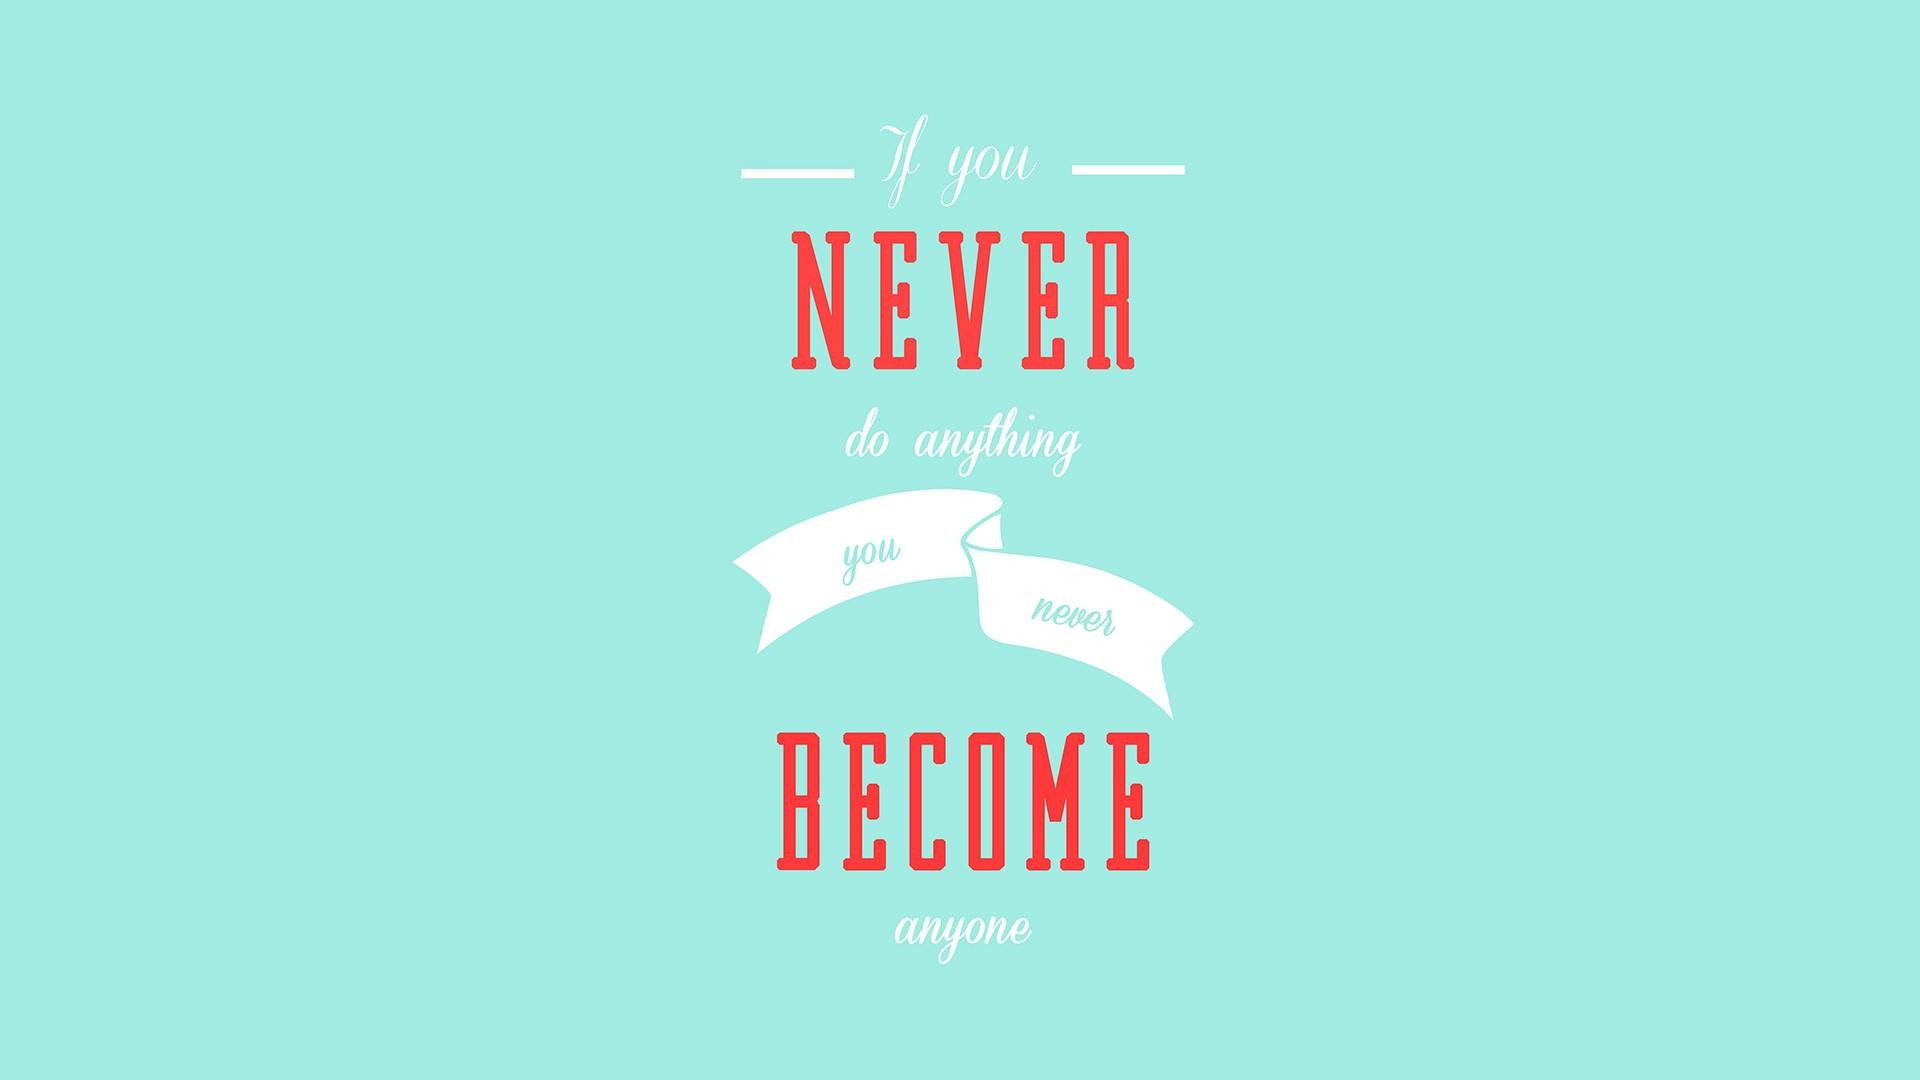 1920x1080 If you never do anything you never become anyone